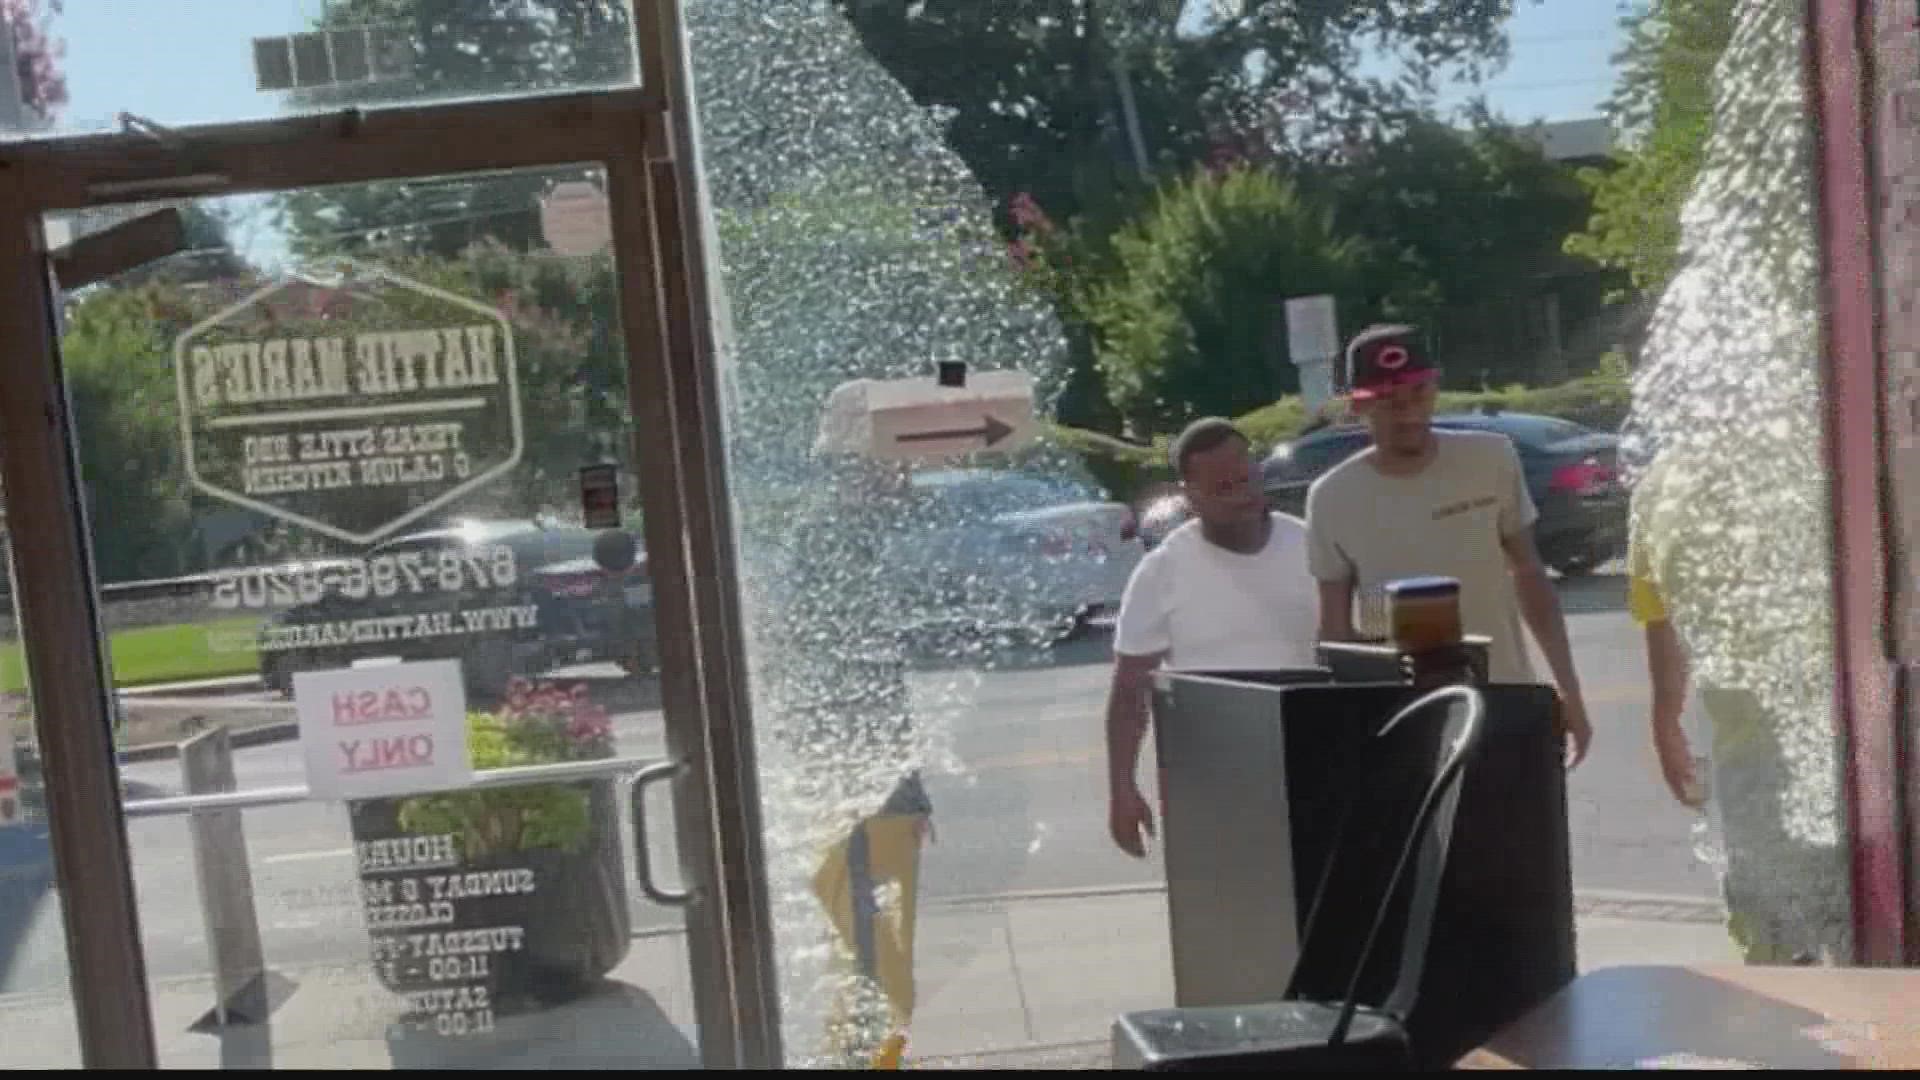 The owners of Hattie Marie's BBQ arrived to find the front window completely shattered.